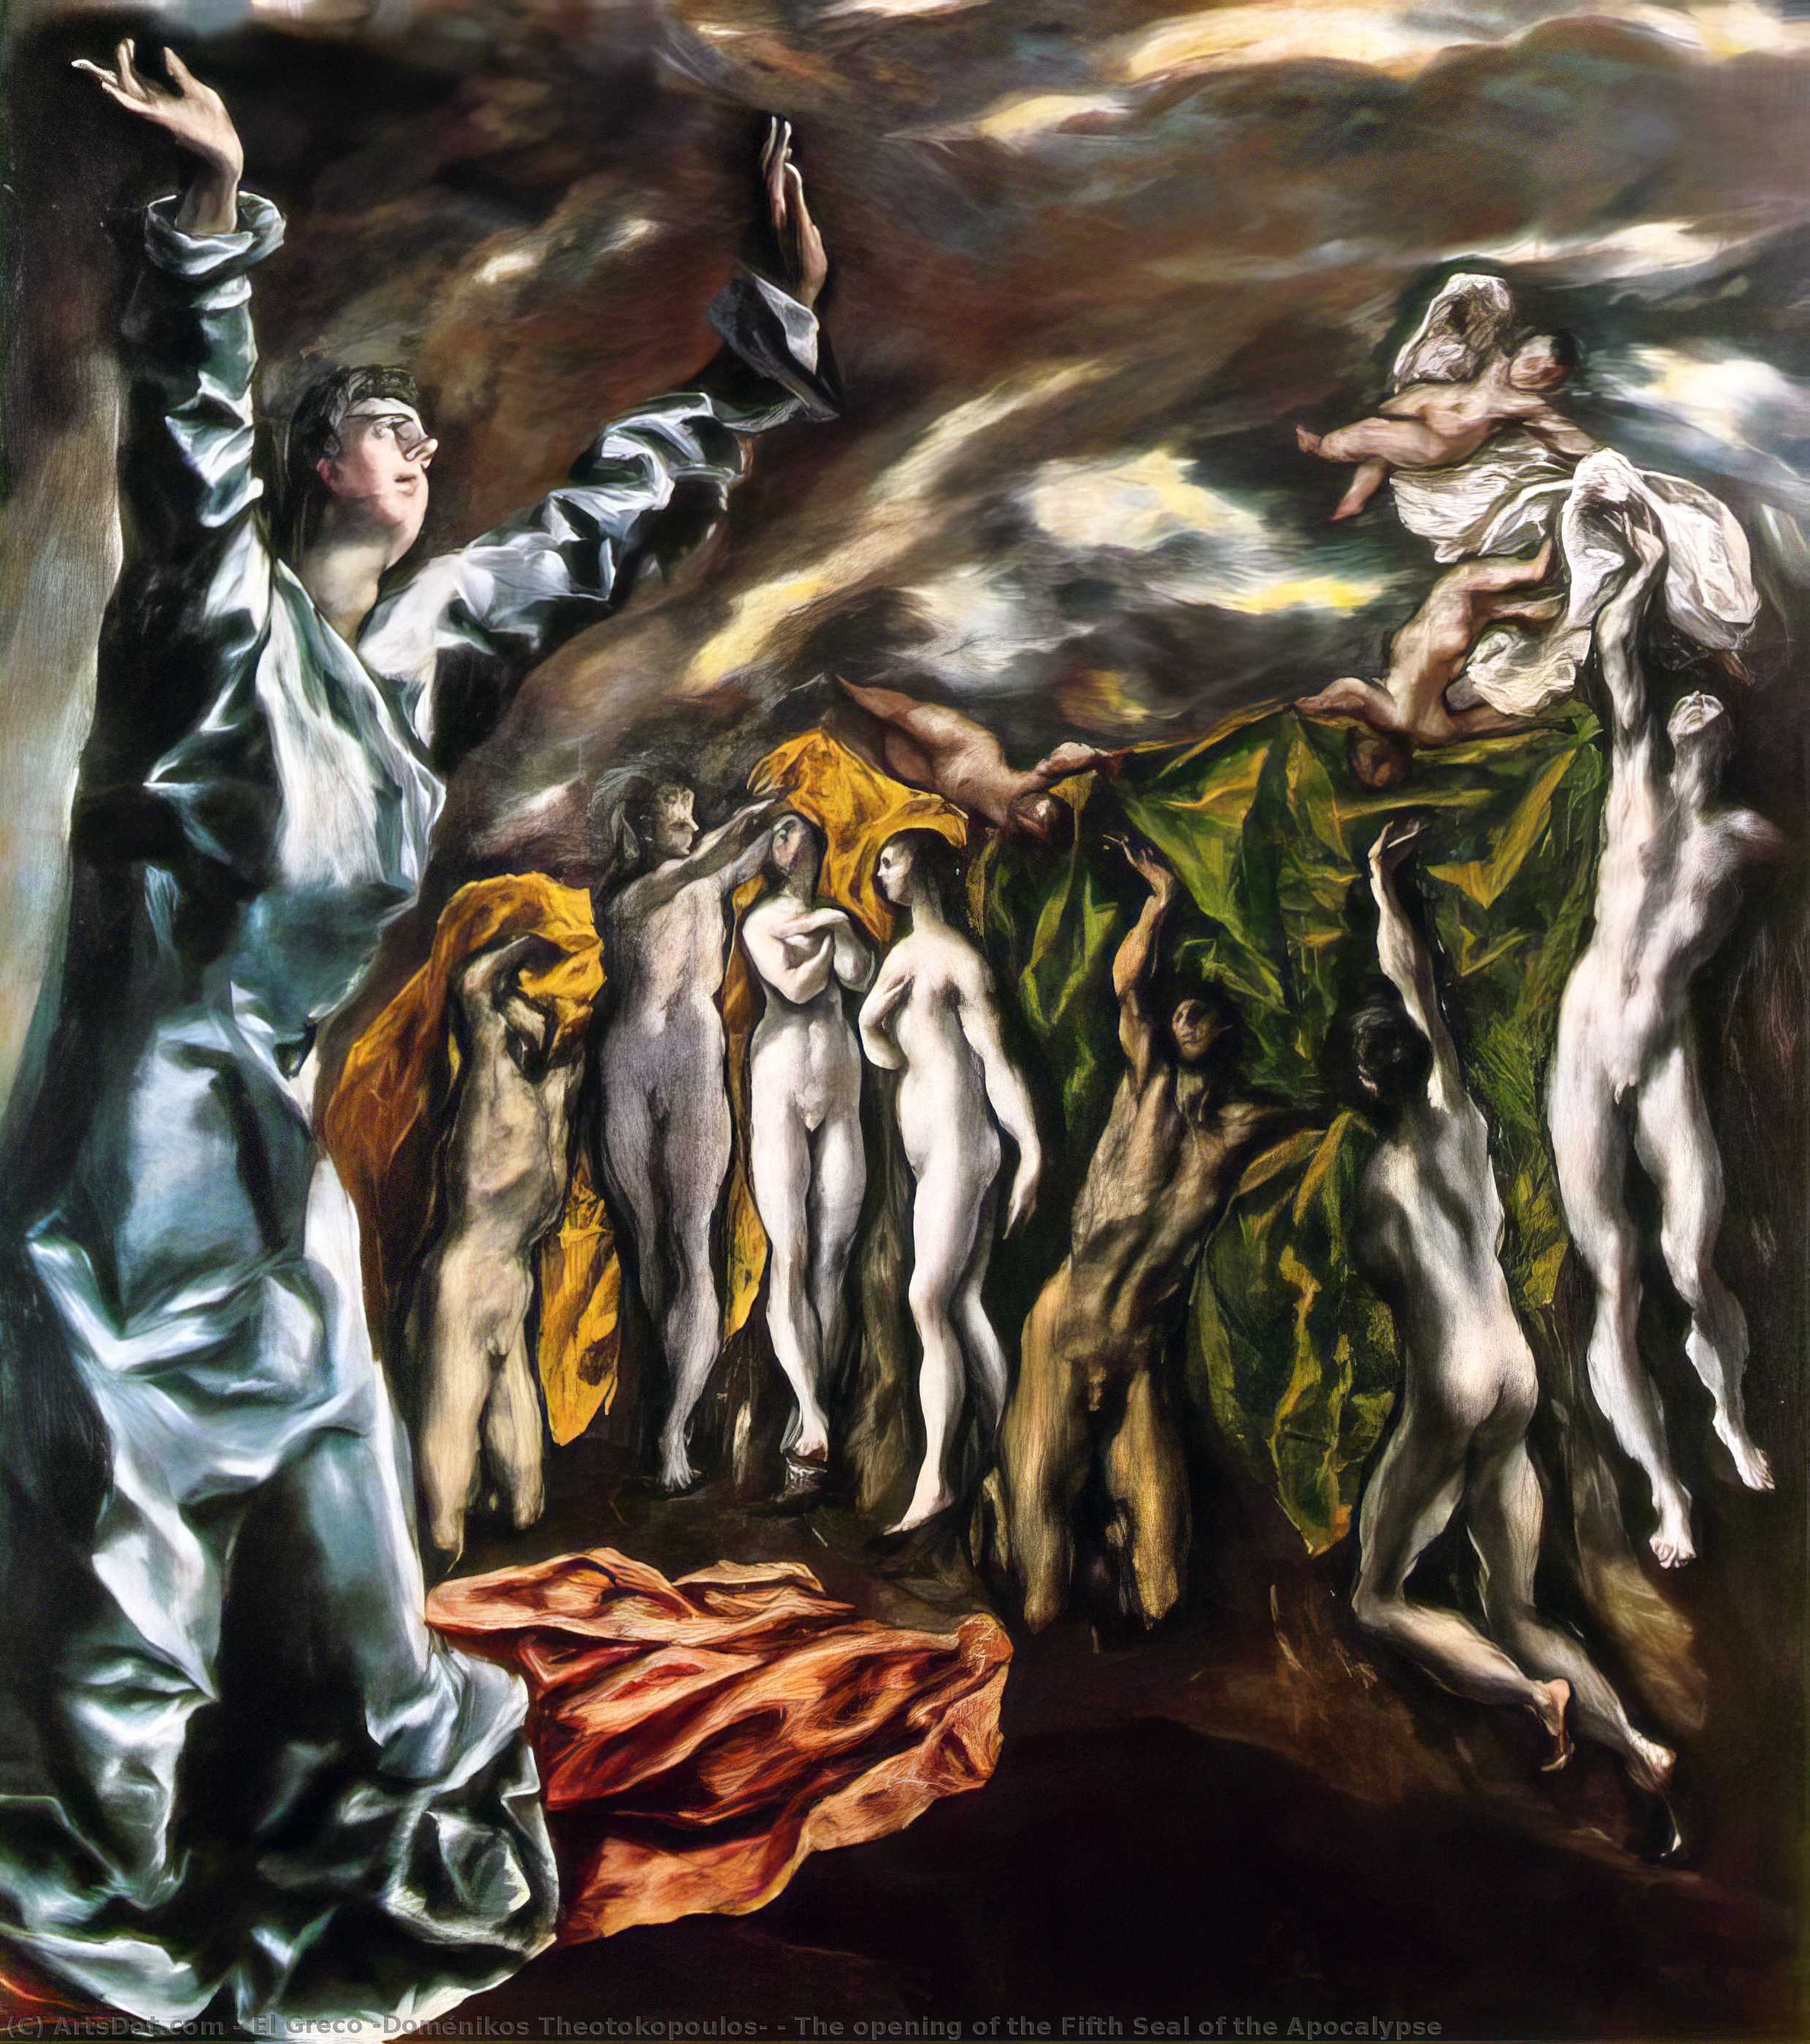 WikiOO.org - Encyclopedia of Fine Arts - Maleri, Artwork El Greco (Doménikos Theotokopoulos) - The opening of the Fifth Seal of the Apocalypse